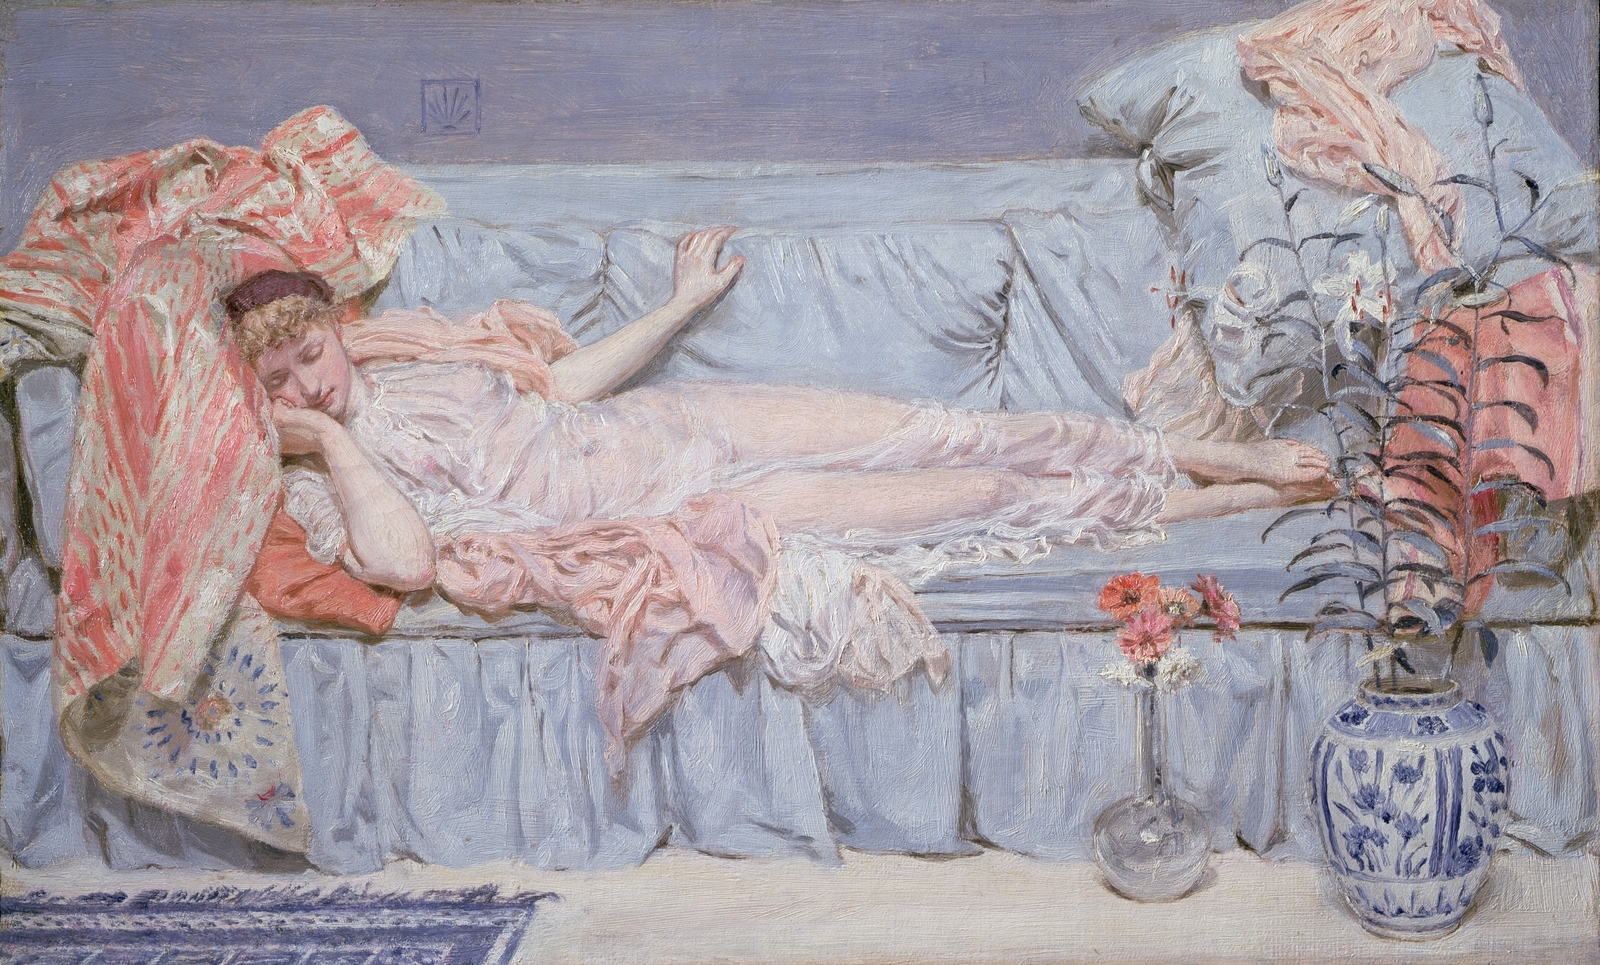 A young woman reclines on a bed of sheets with vases of flowers in front of her.